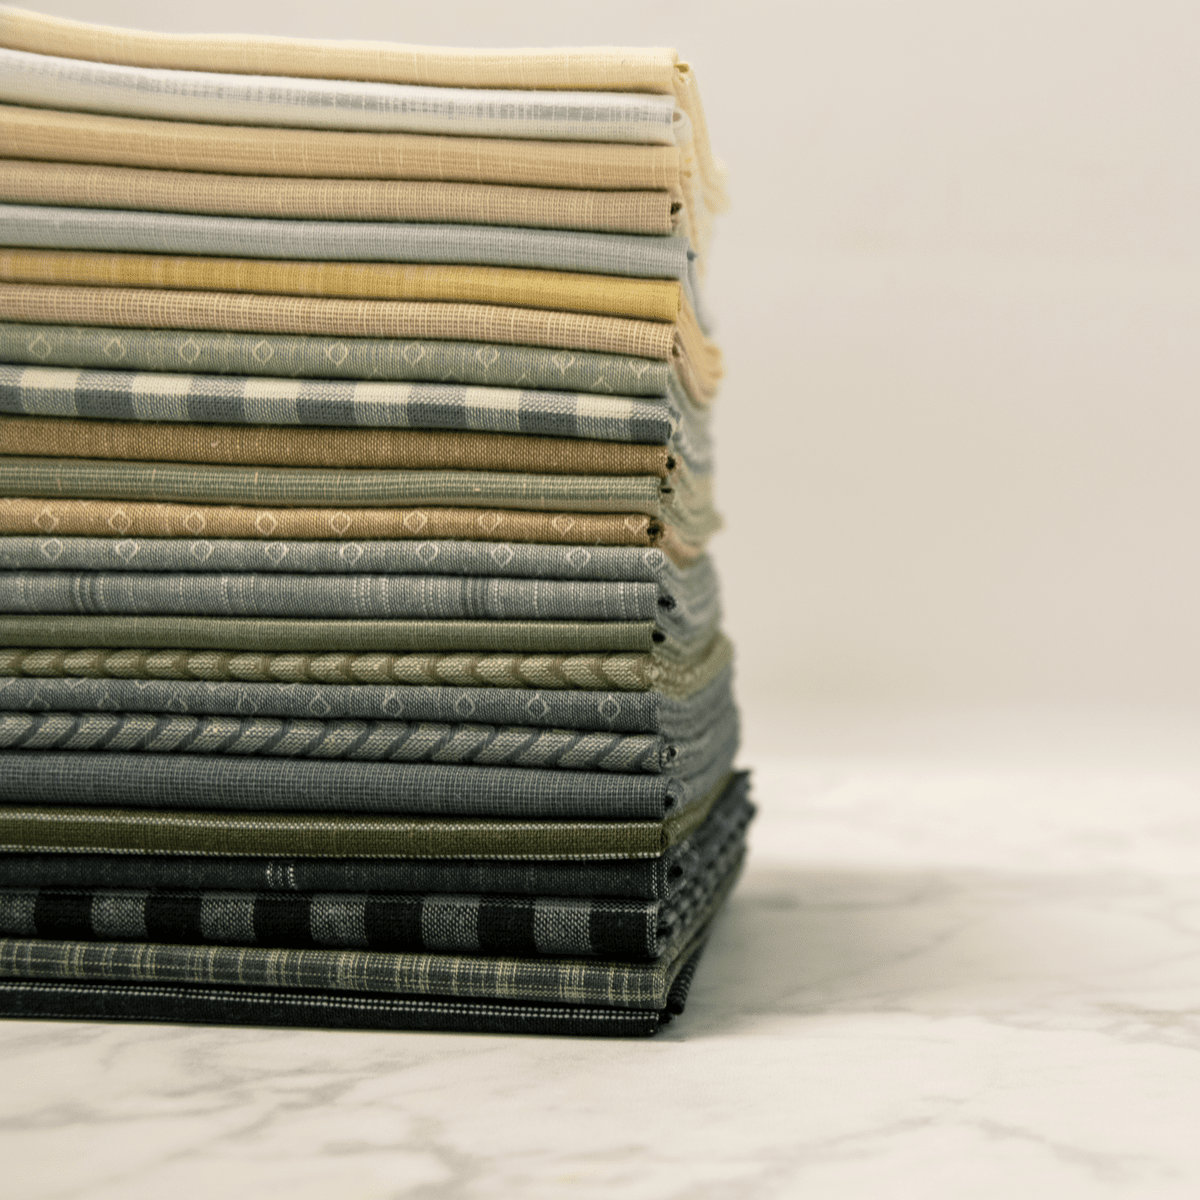 A Stack of Compass woven fabrics by Laundry Basket Quilts showing the texture and weave of this quilting fabric type